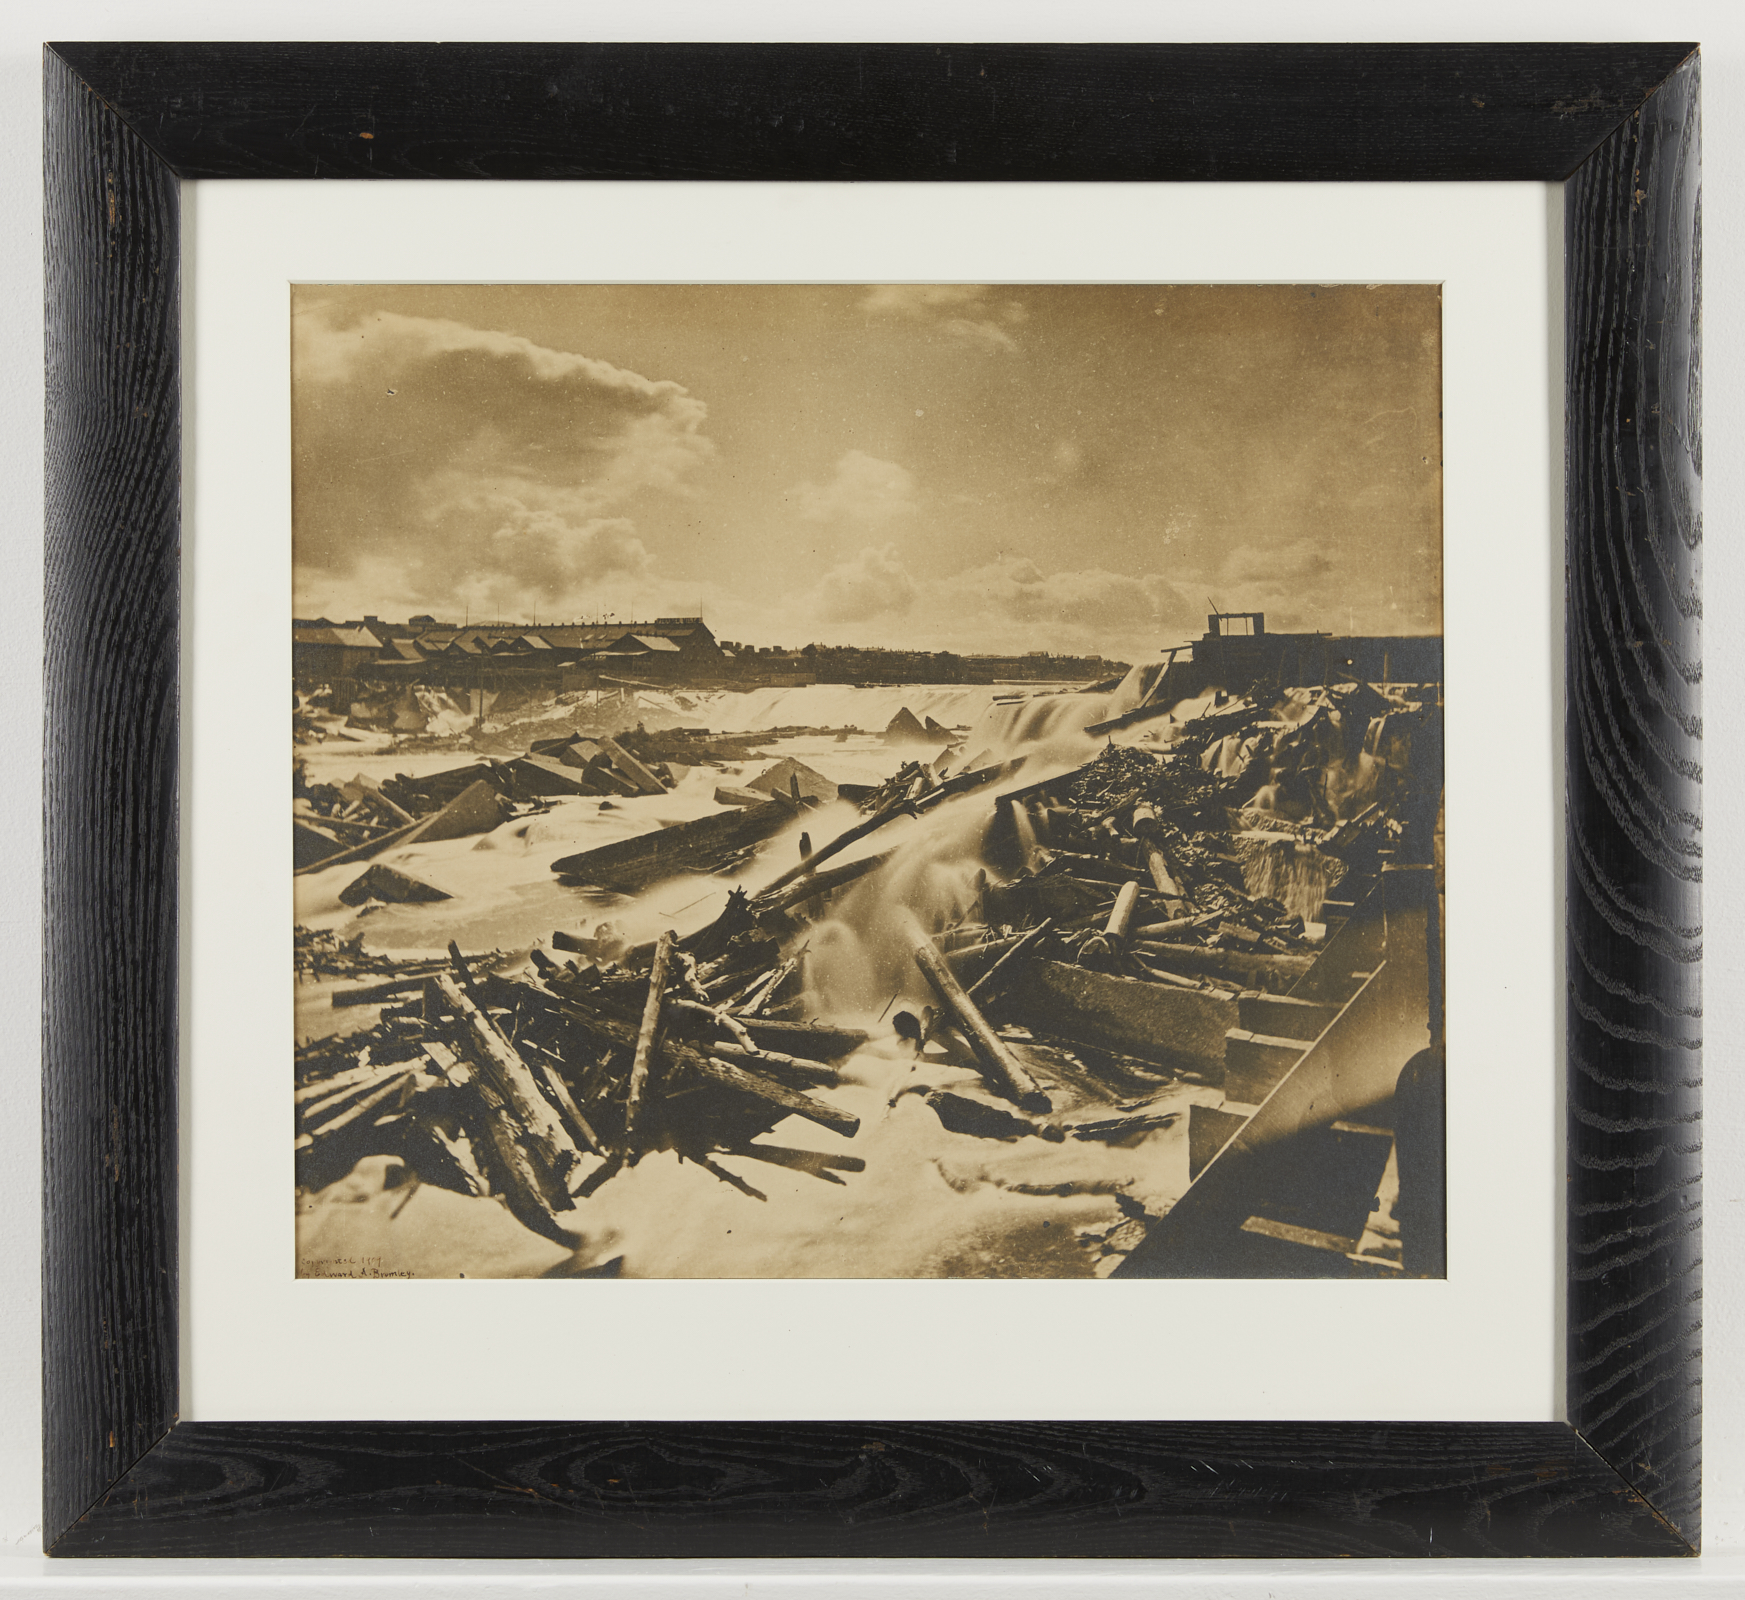 St. Anthony Falls Wreckage Photograph 1909 - Image 2 of 6